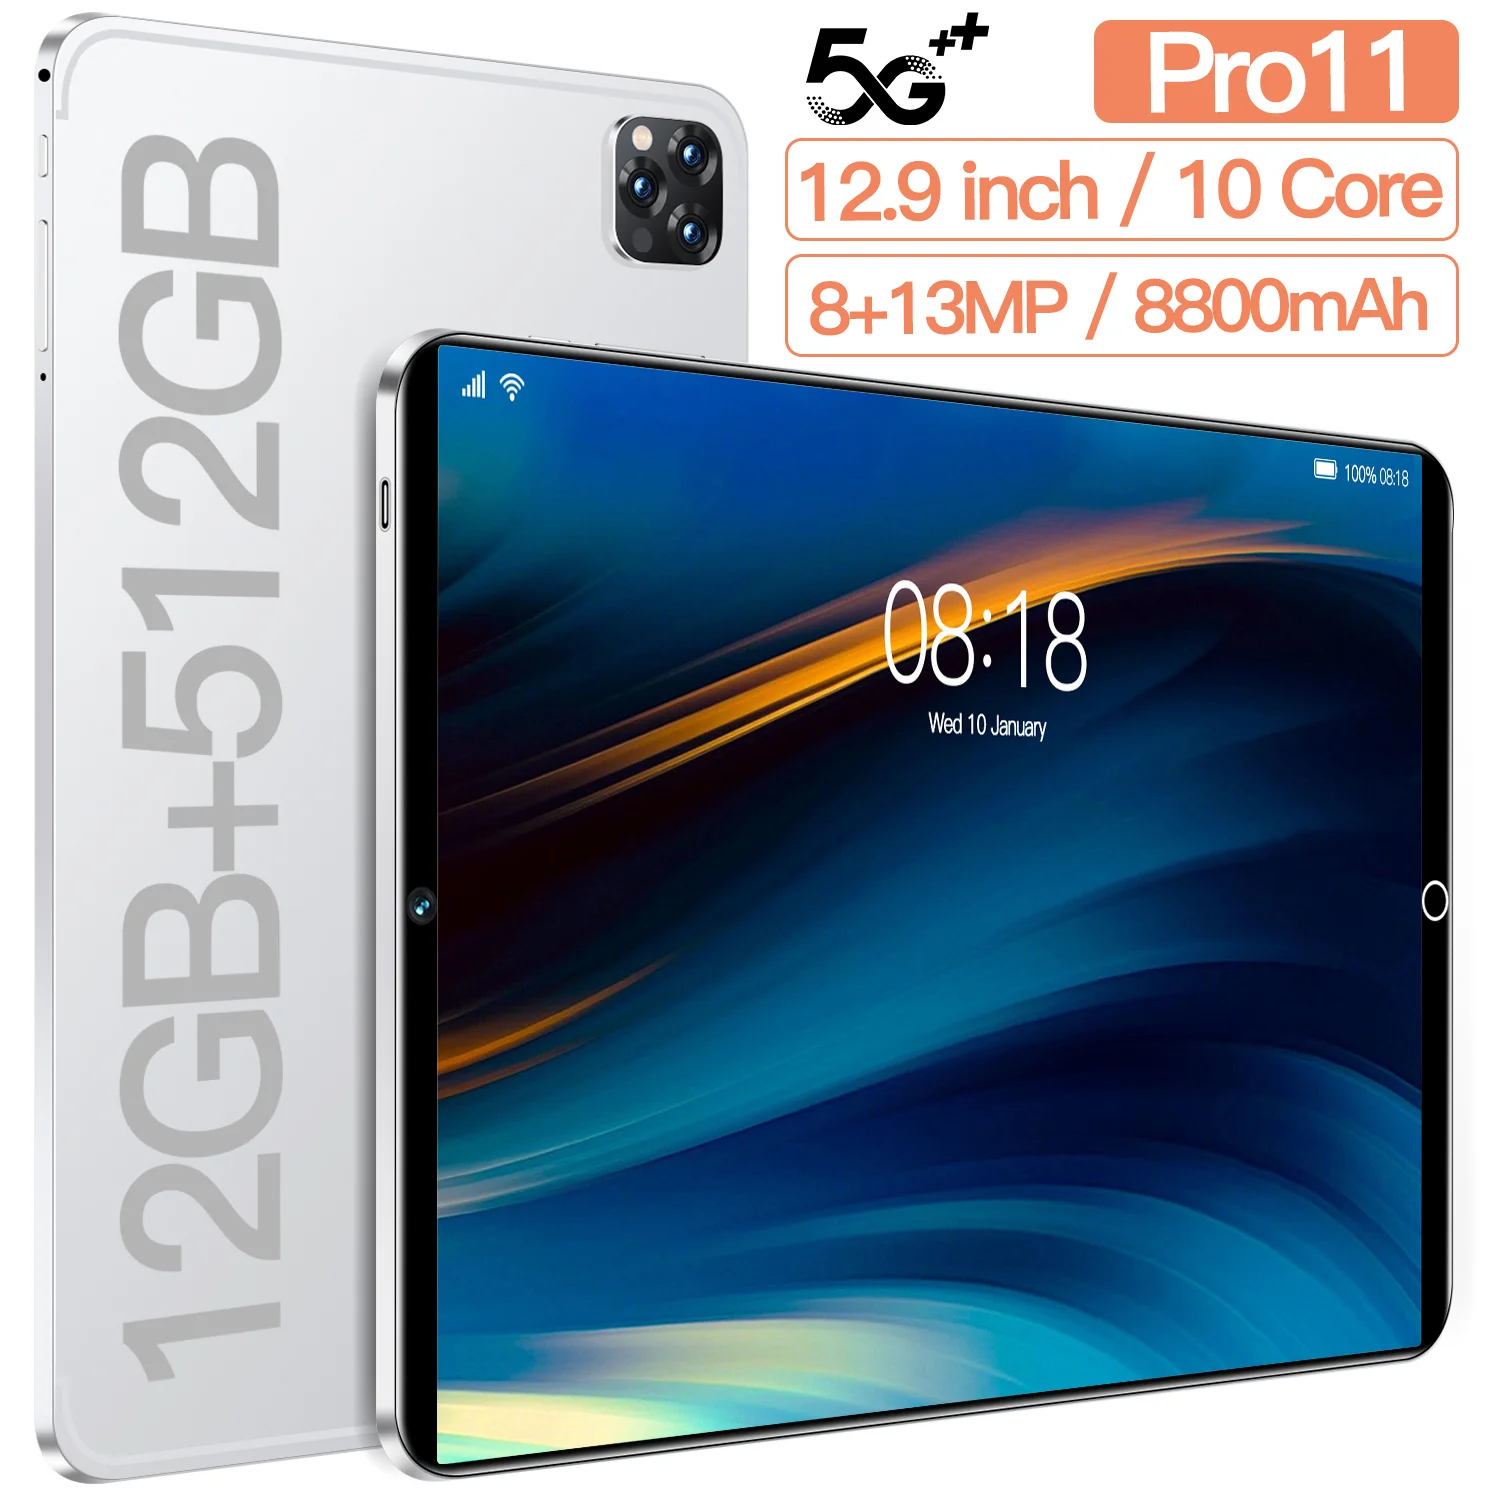 

Tablet P11 Pro 12.9 Inch Tablete Full HD Screen Tablets Android 10 Dual Sim 8800mAh Tablette P11 Pro Android Global Firmware 5G